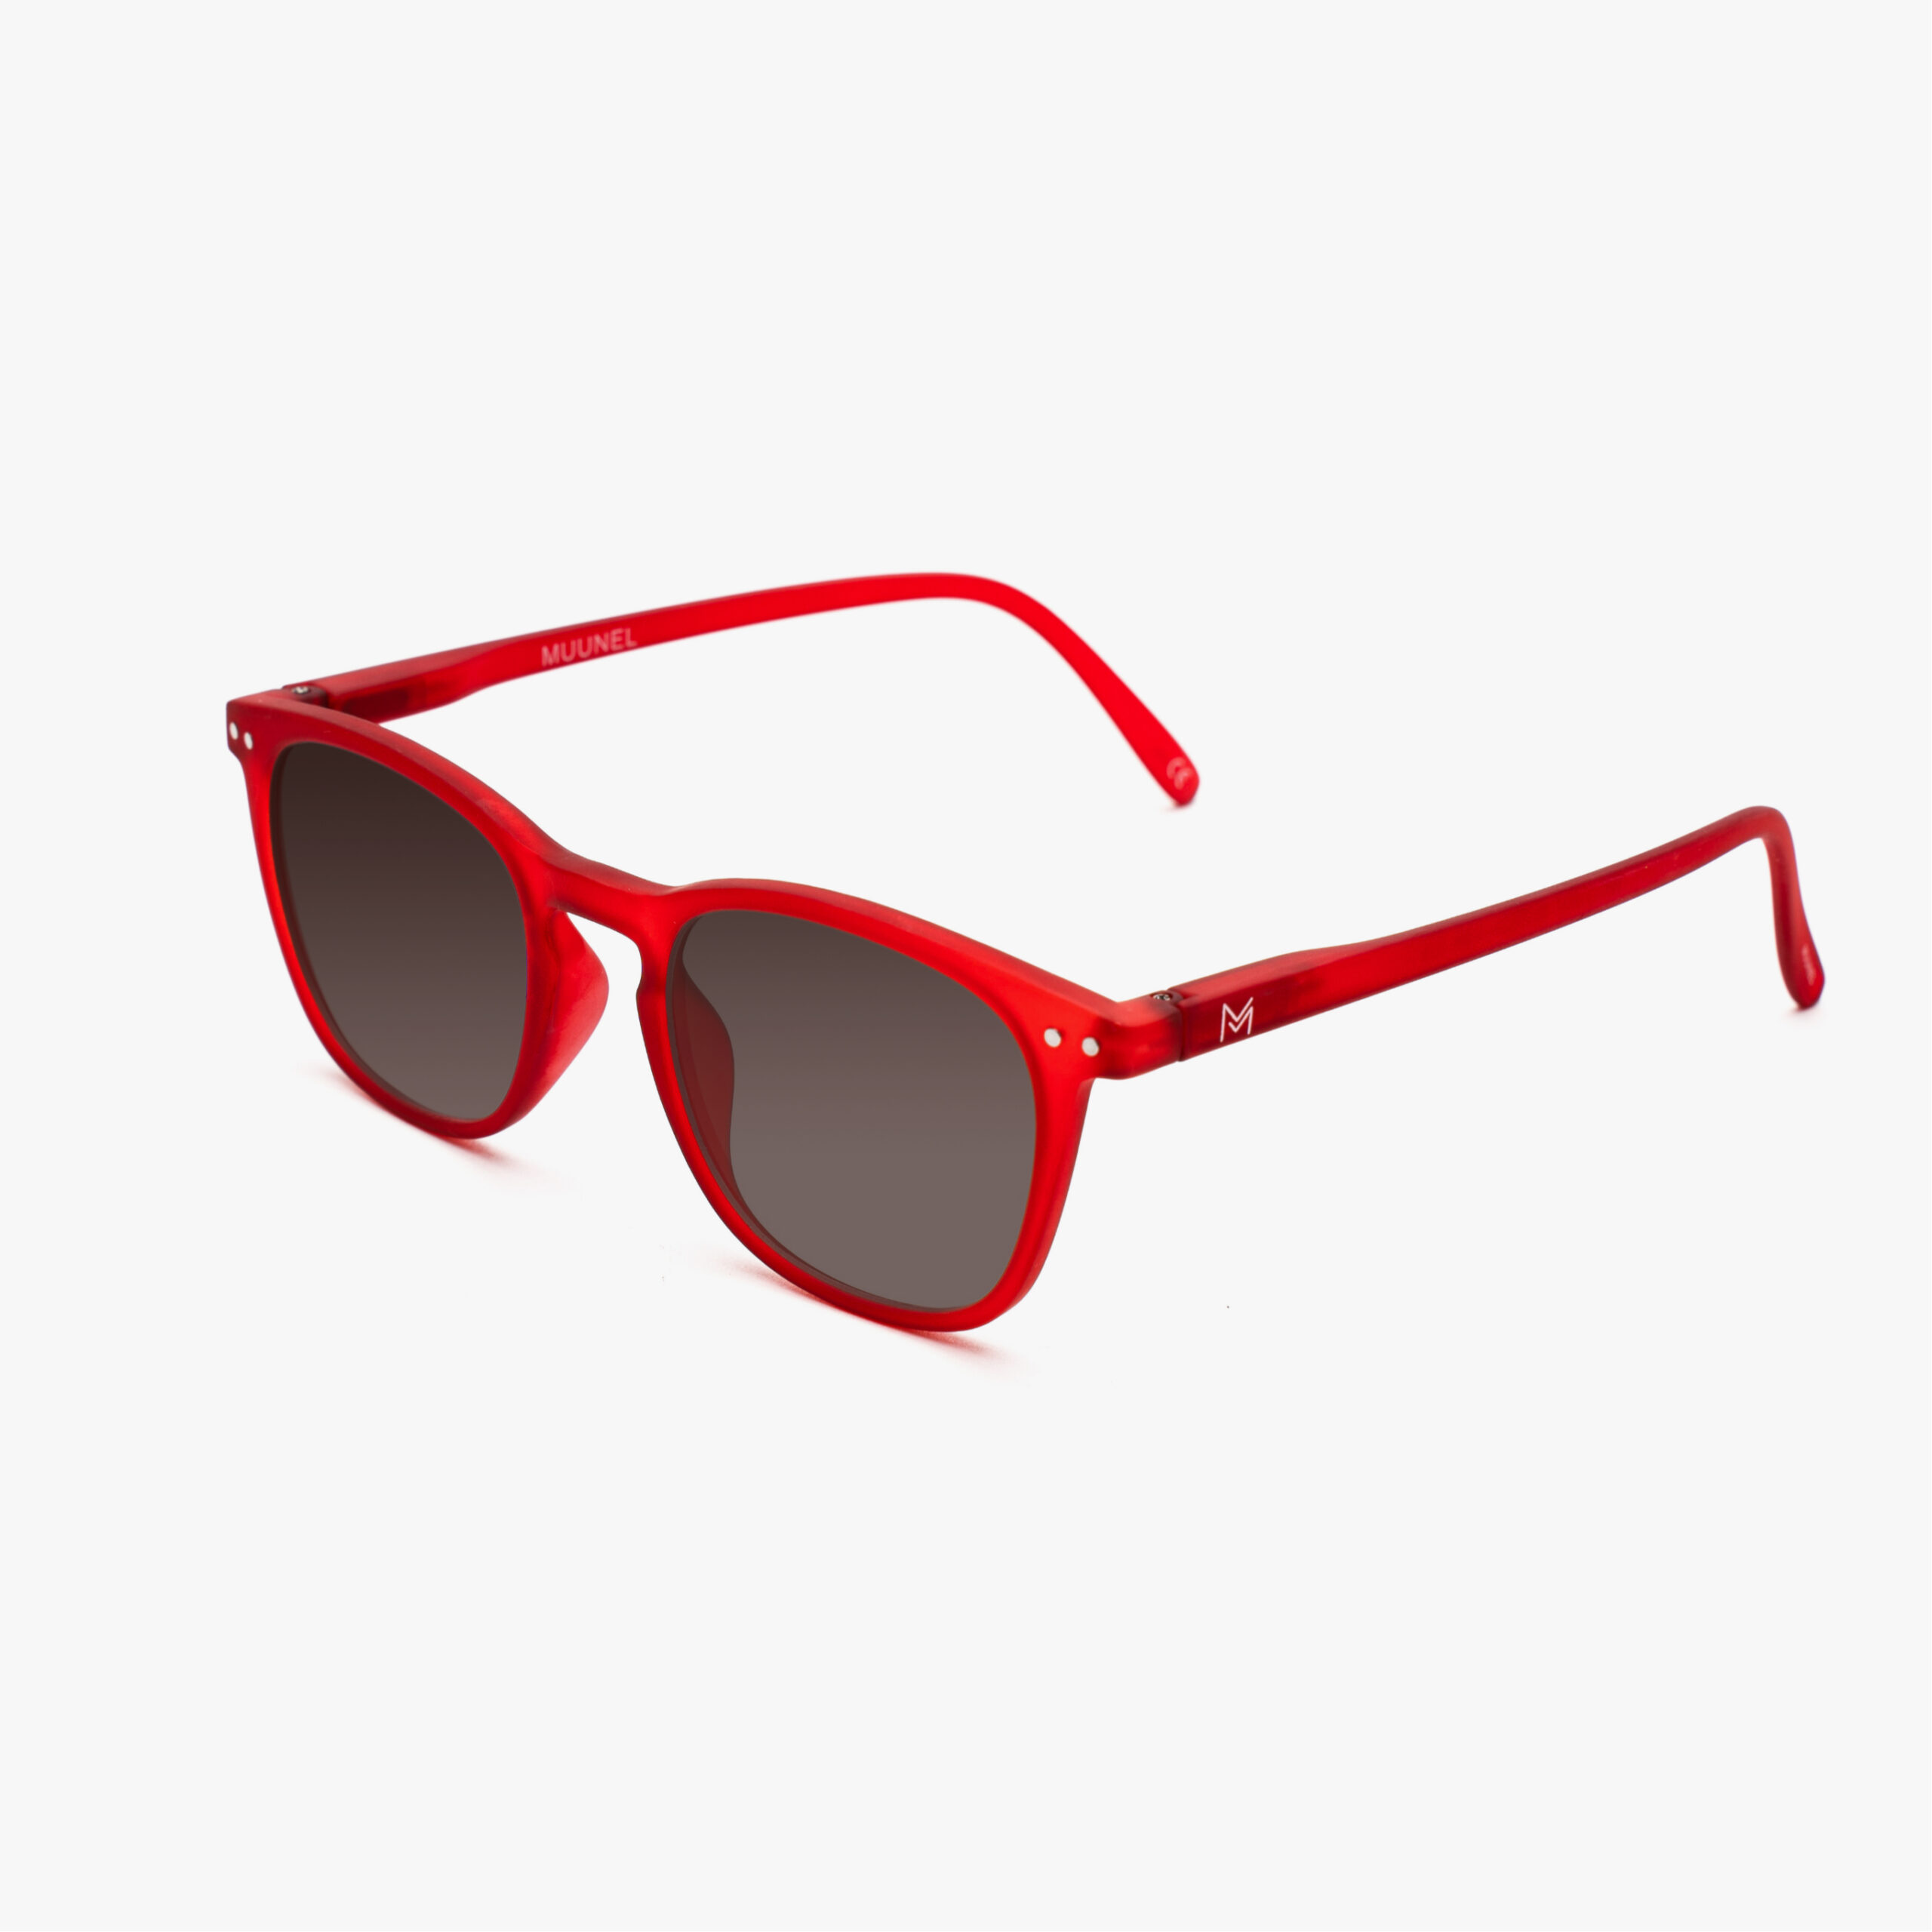 transition-photochromic-glasses-brown-lenses-william-red-profile (2)